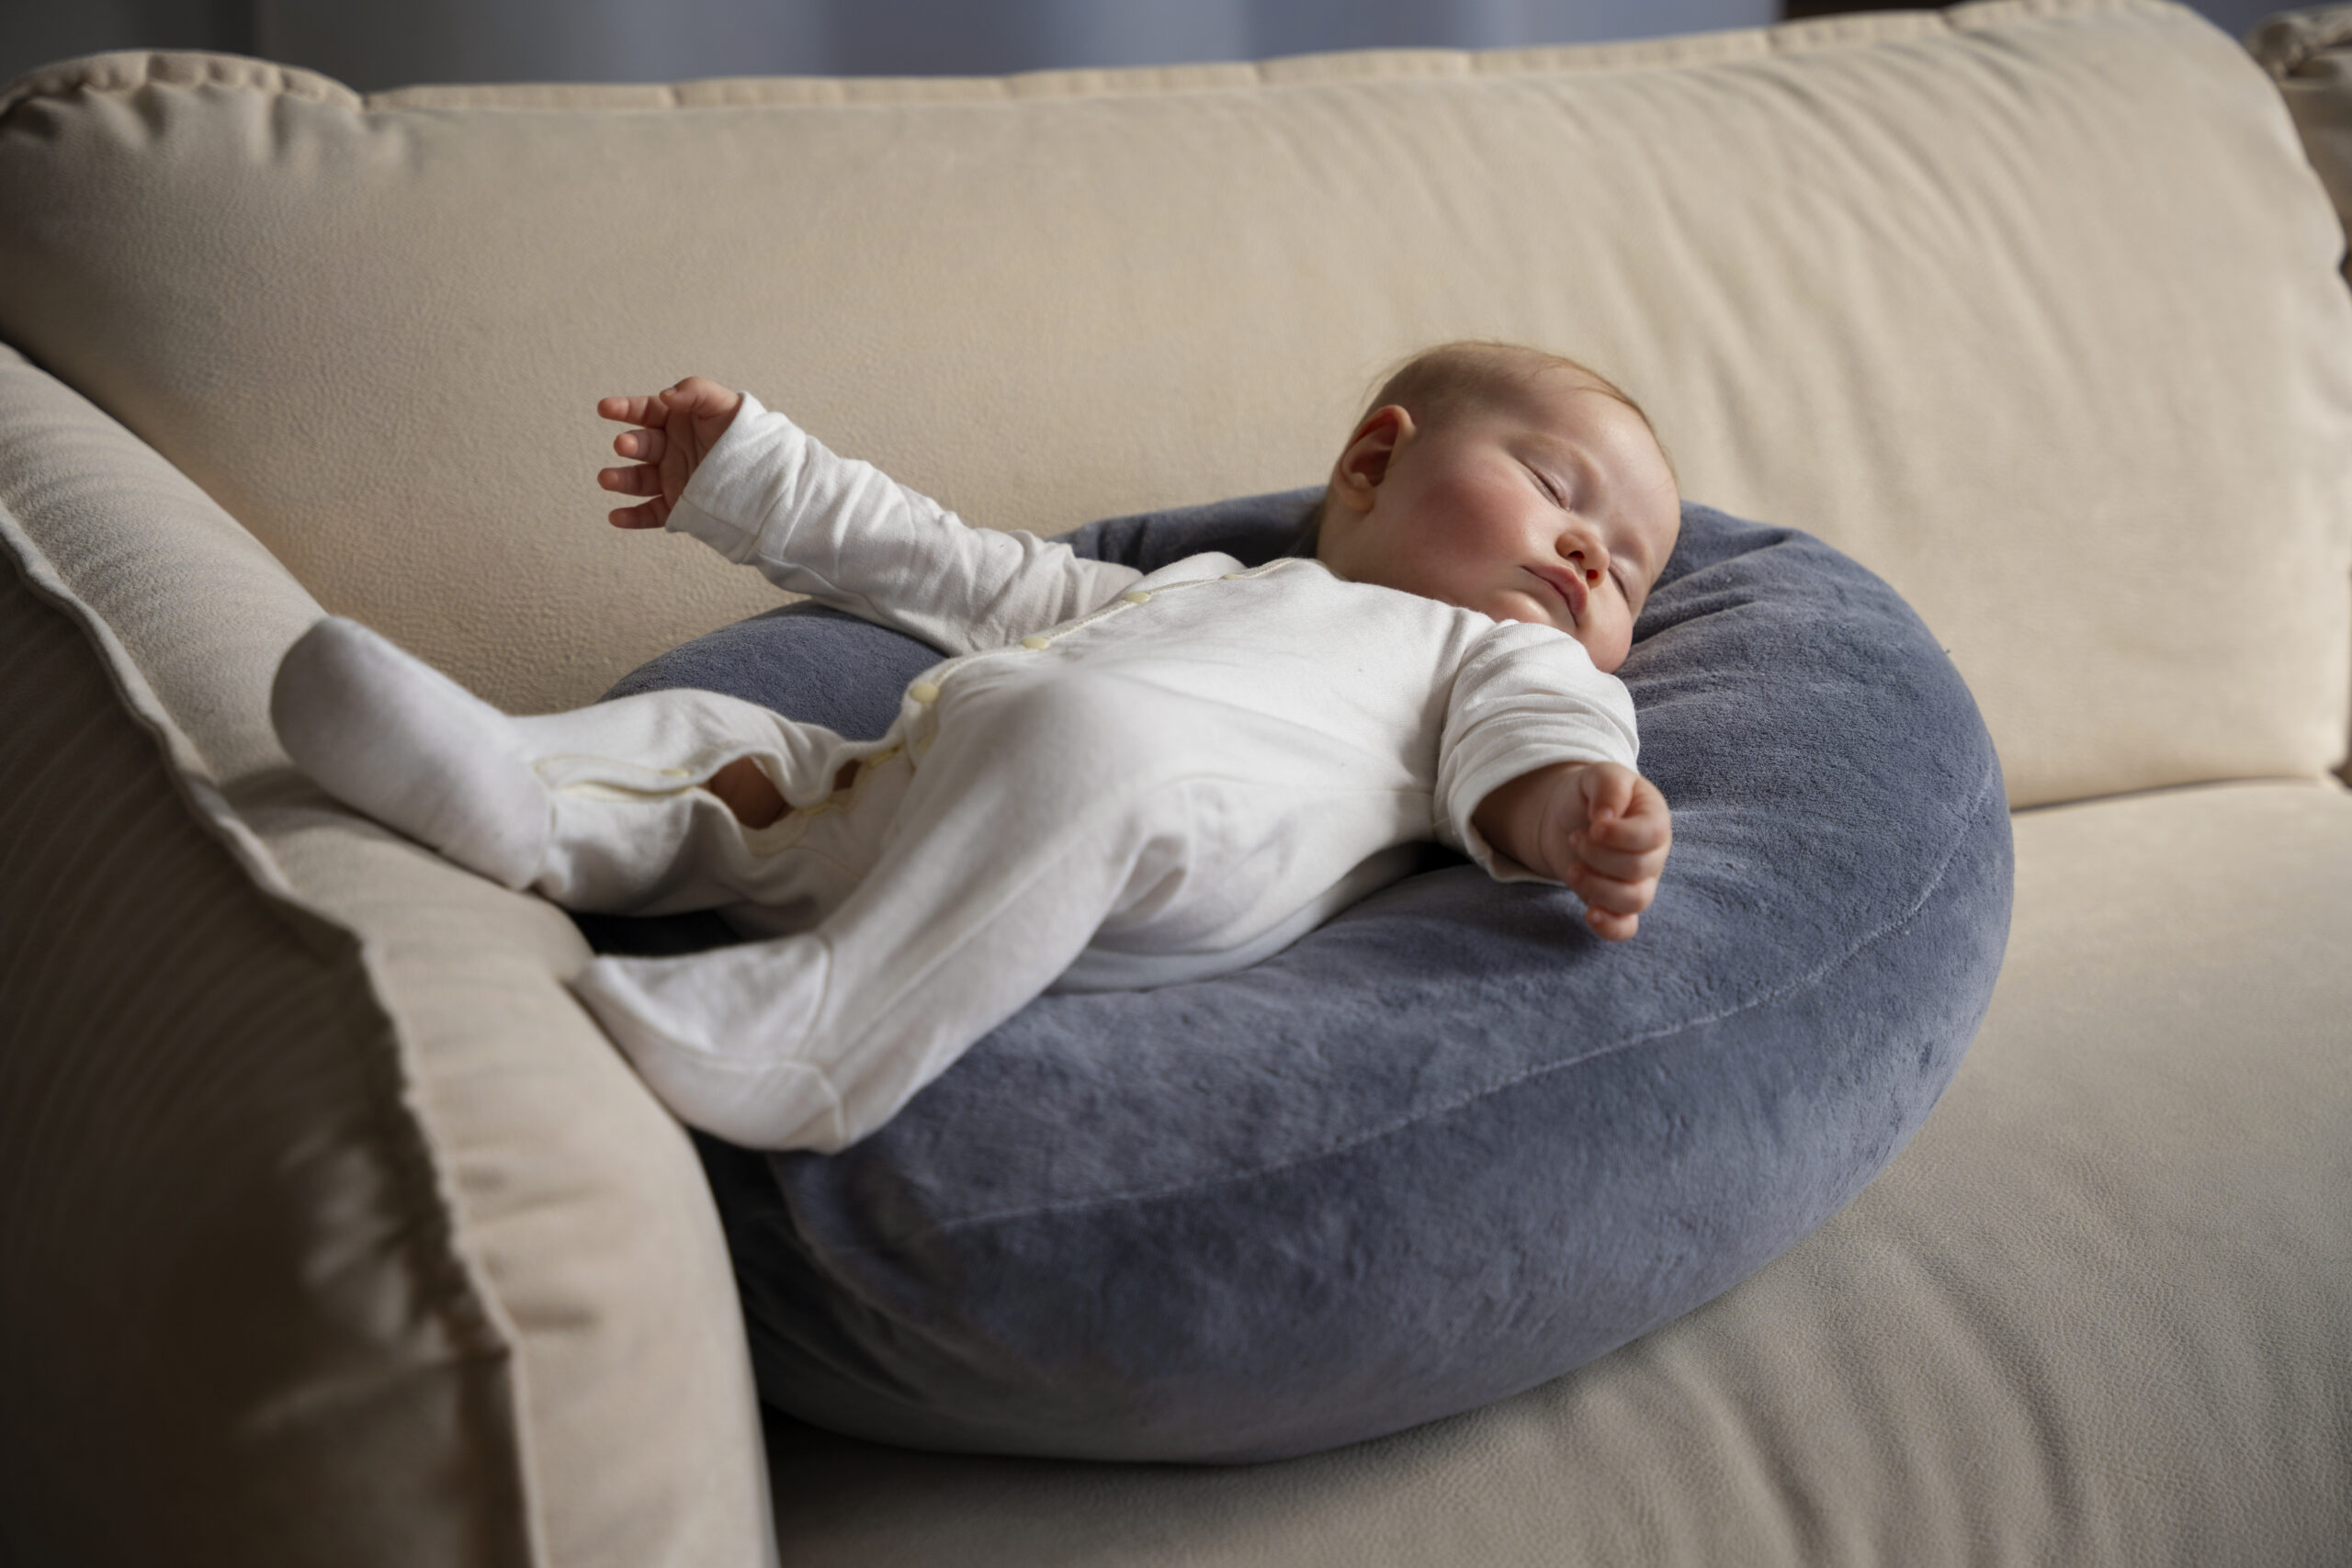 Over 160 Infant Deaths Linked to Nursing Pillows